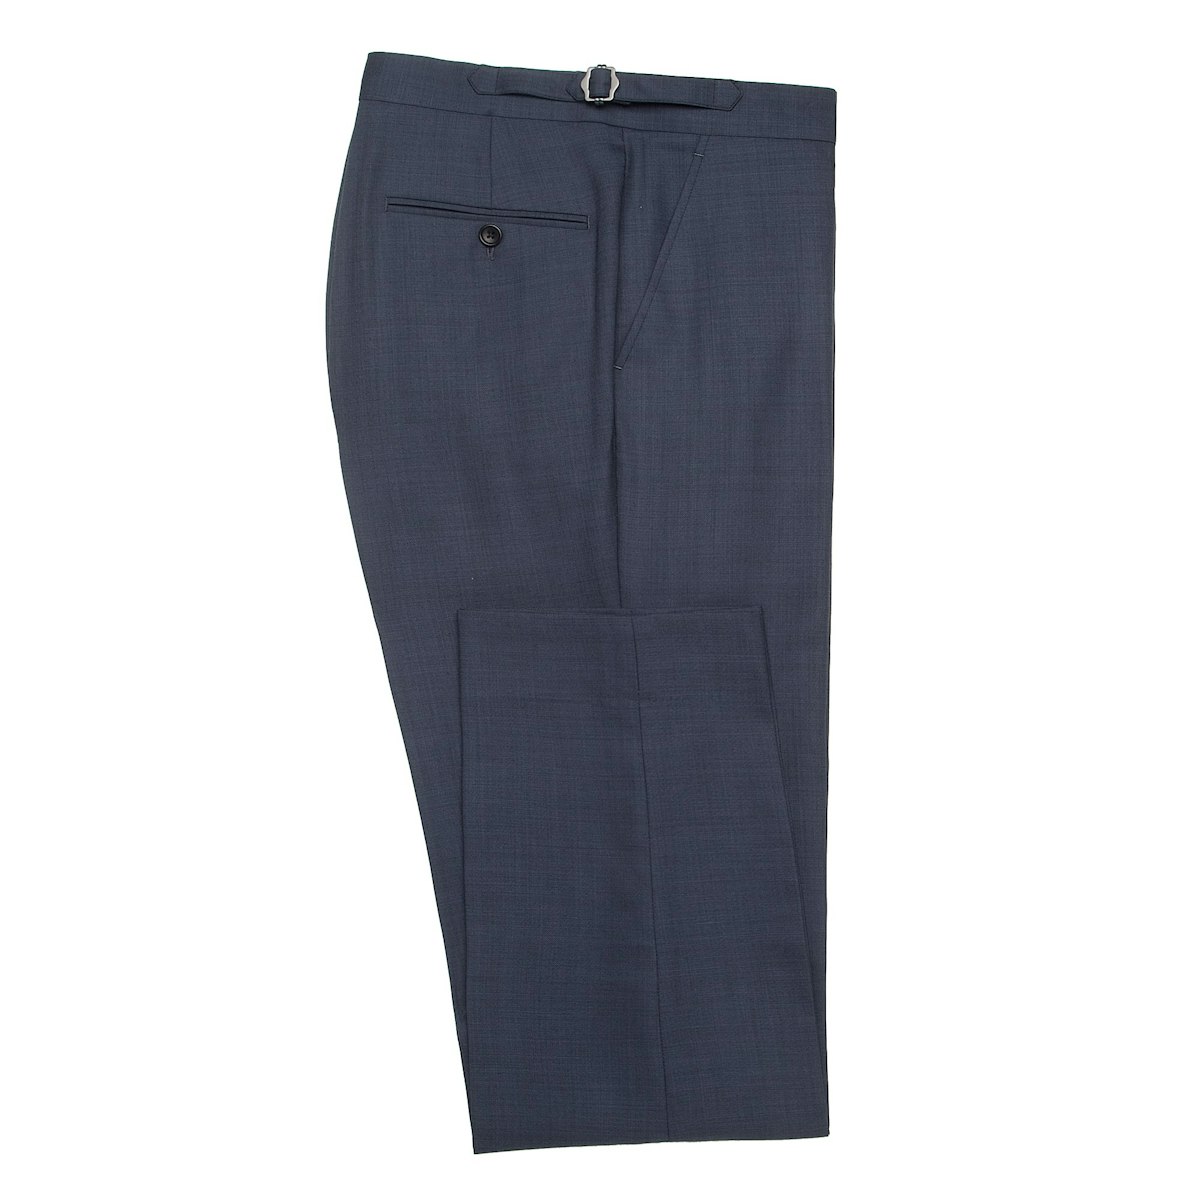 InStitchu Collection The Gainsborough Pants